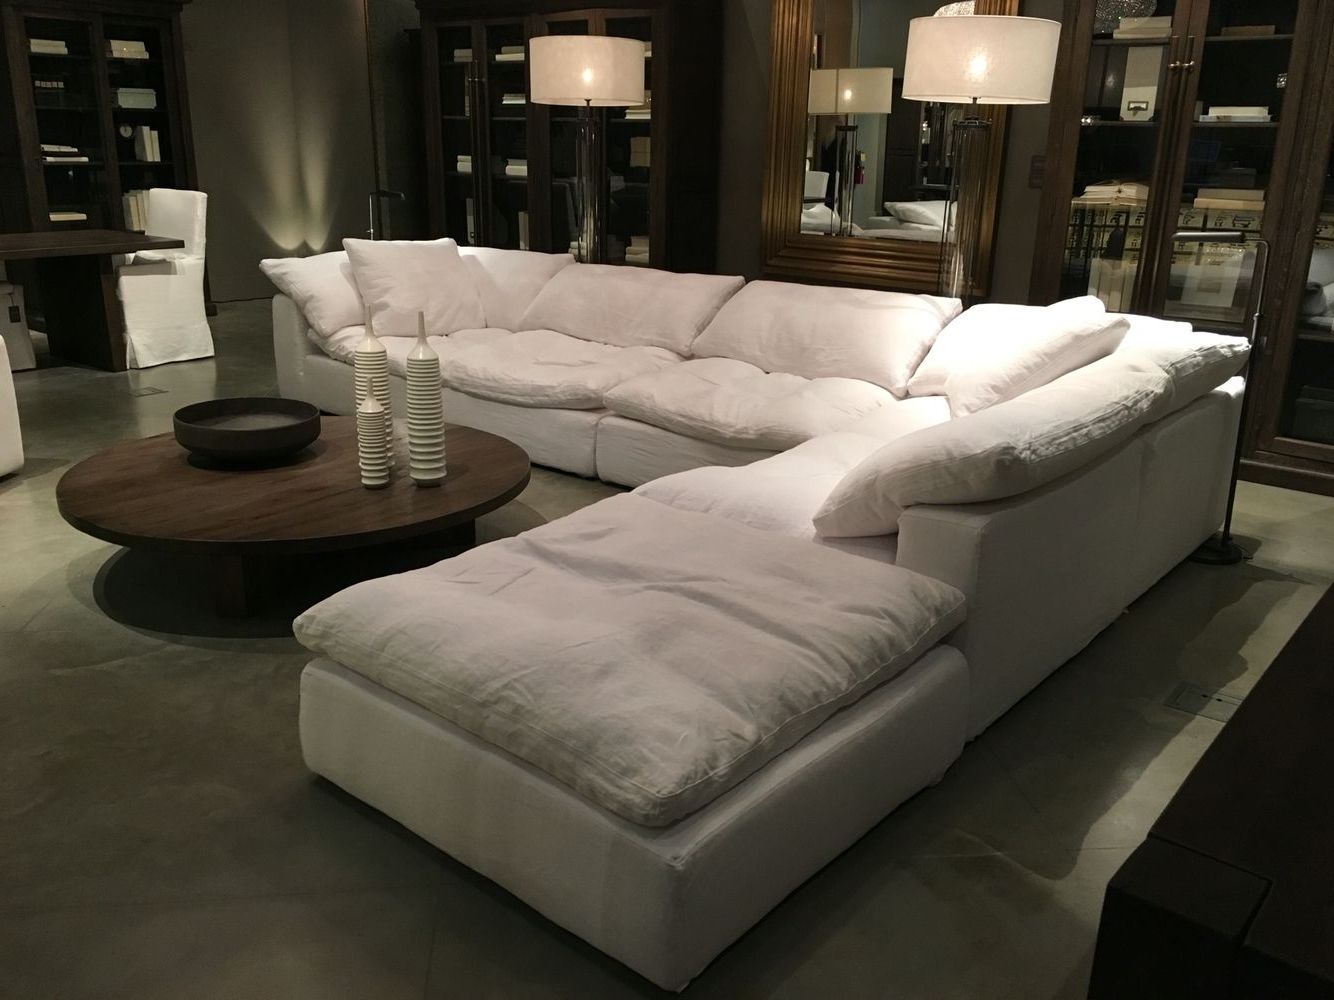 [%restoration Hardware Sectional "cloud" Couch | [future Home Inside Current Comfy Sectional Sofas|comfy Sectional Sofas Within Recent Restoration Hardware Sectional "cloud" Couch | [future Home|popular Comfy Sectional Sofas Regarding Restoration Hardware Sectional "cloud" Couch | [future Home|trendy Restoration Hardware Sectional "cloud" Couch | [future Home With Comfy Sectional Sofas%] (View 2 of 15)